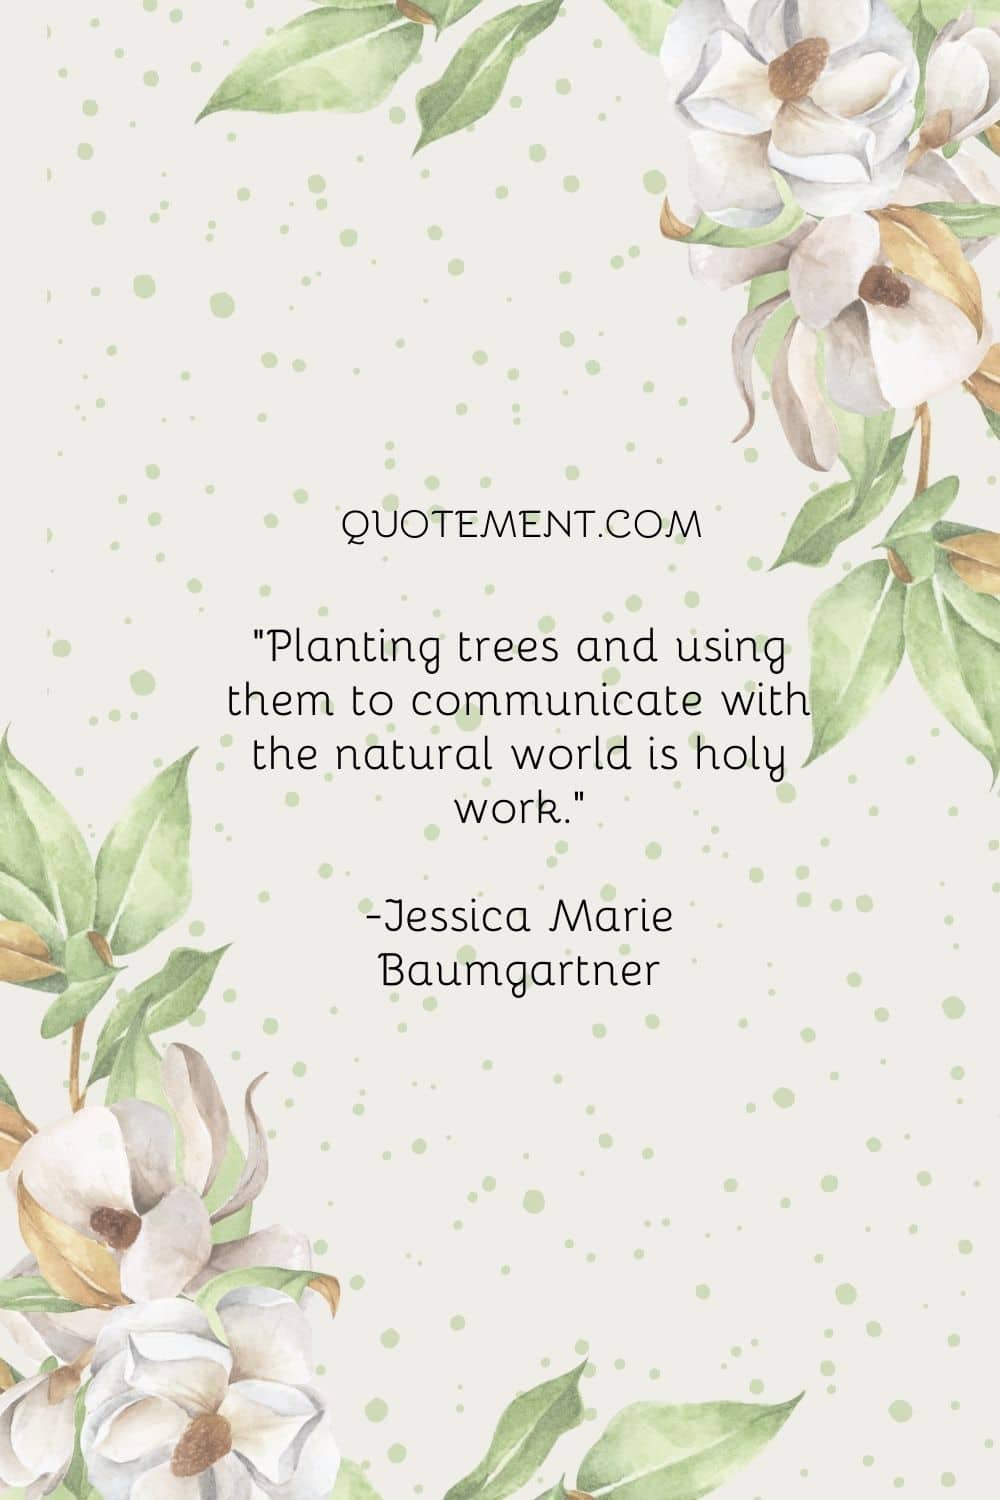 Planting trees and using them to communicate with the natural world is holy work.